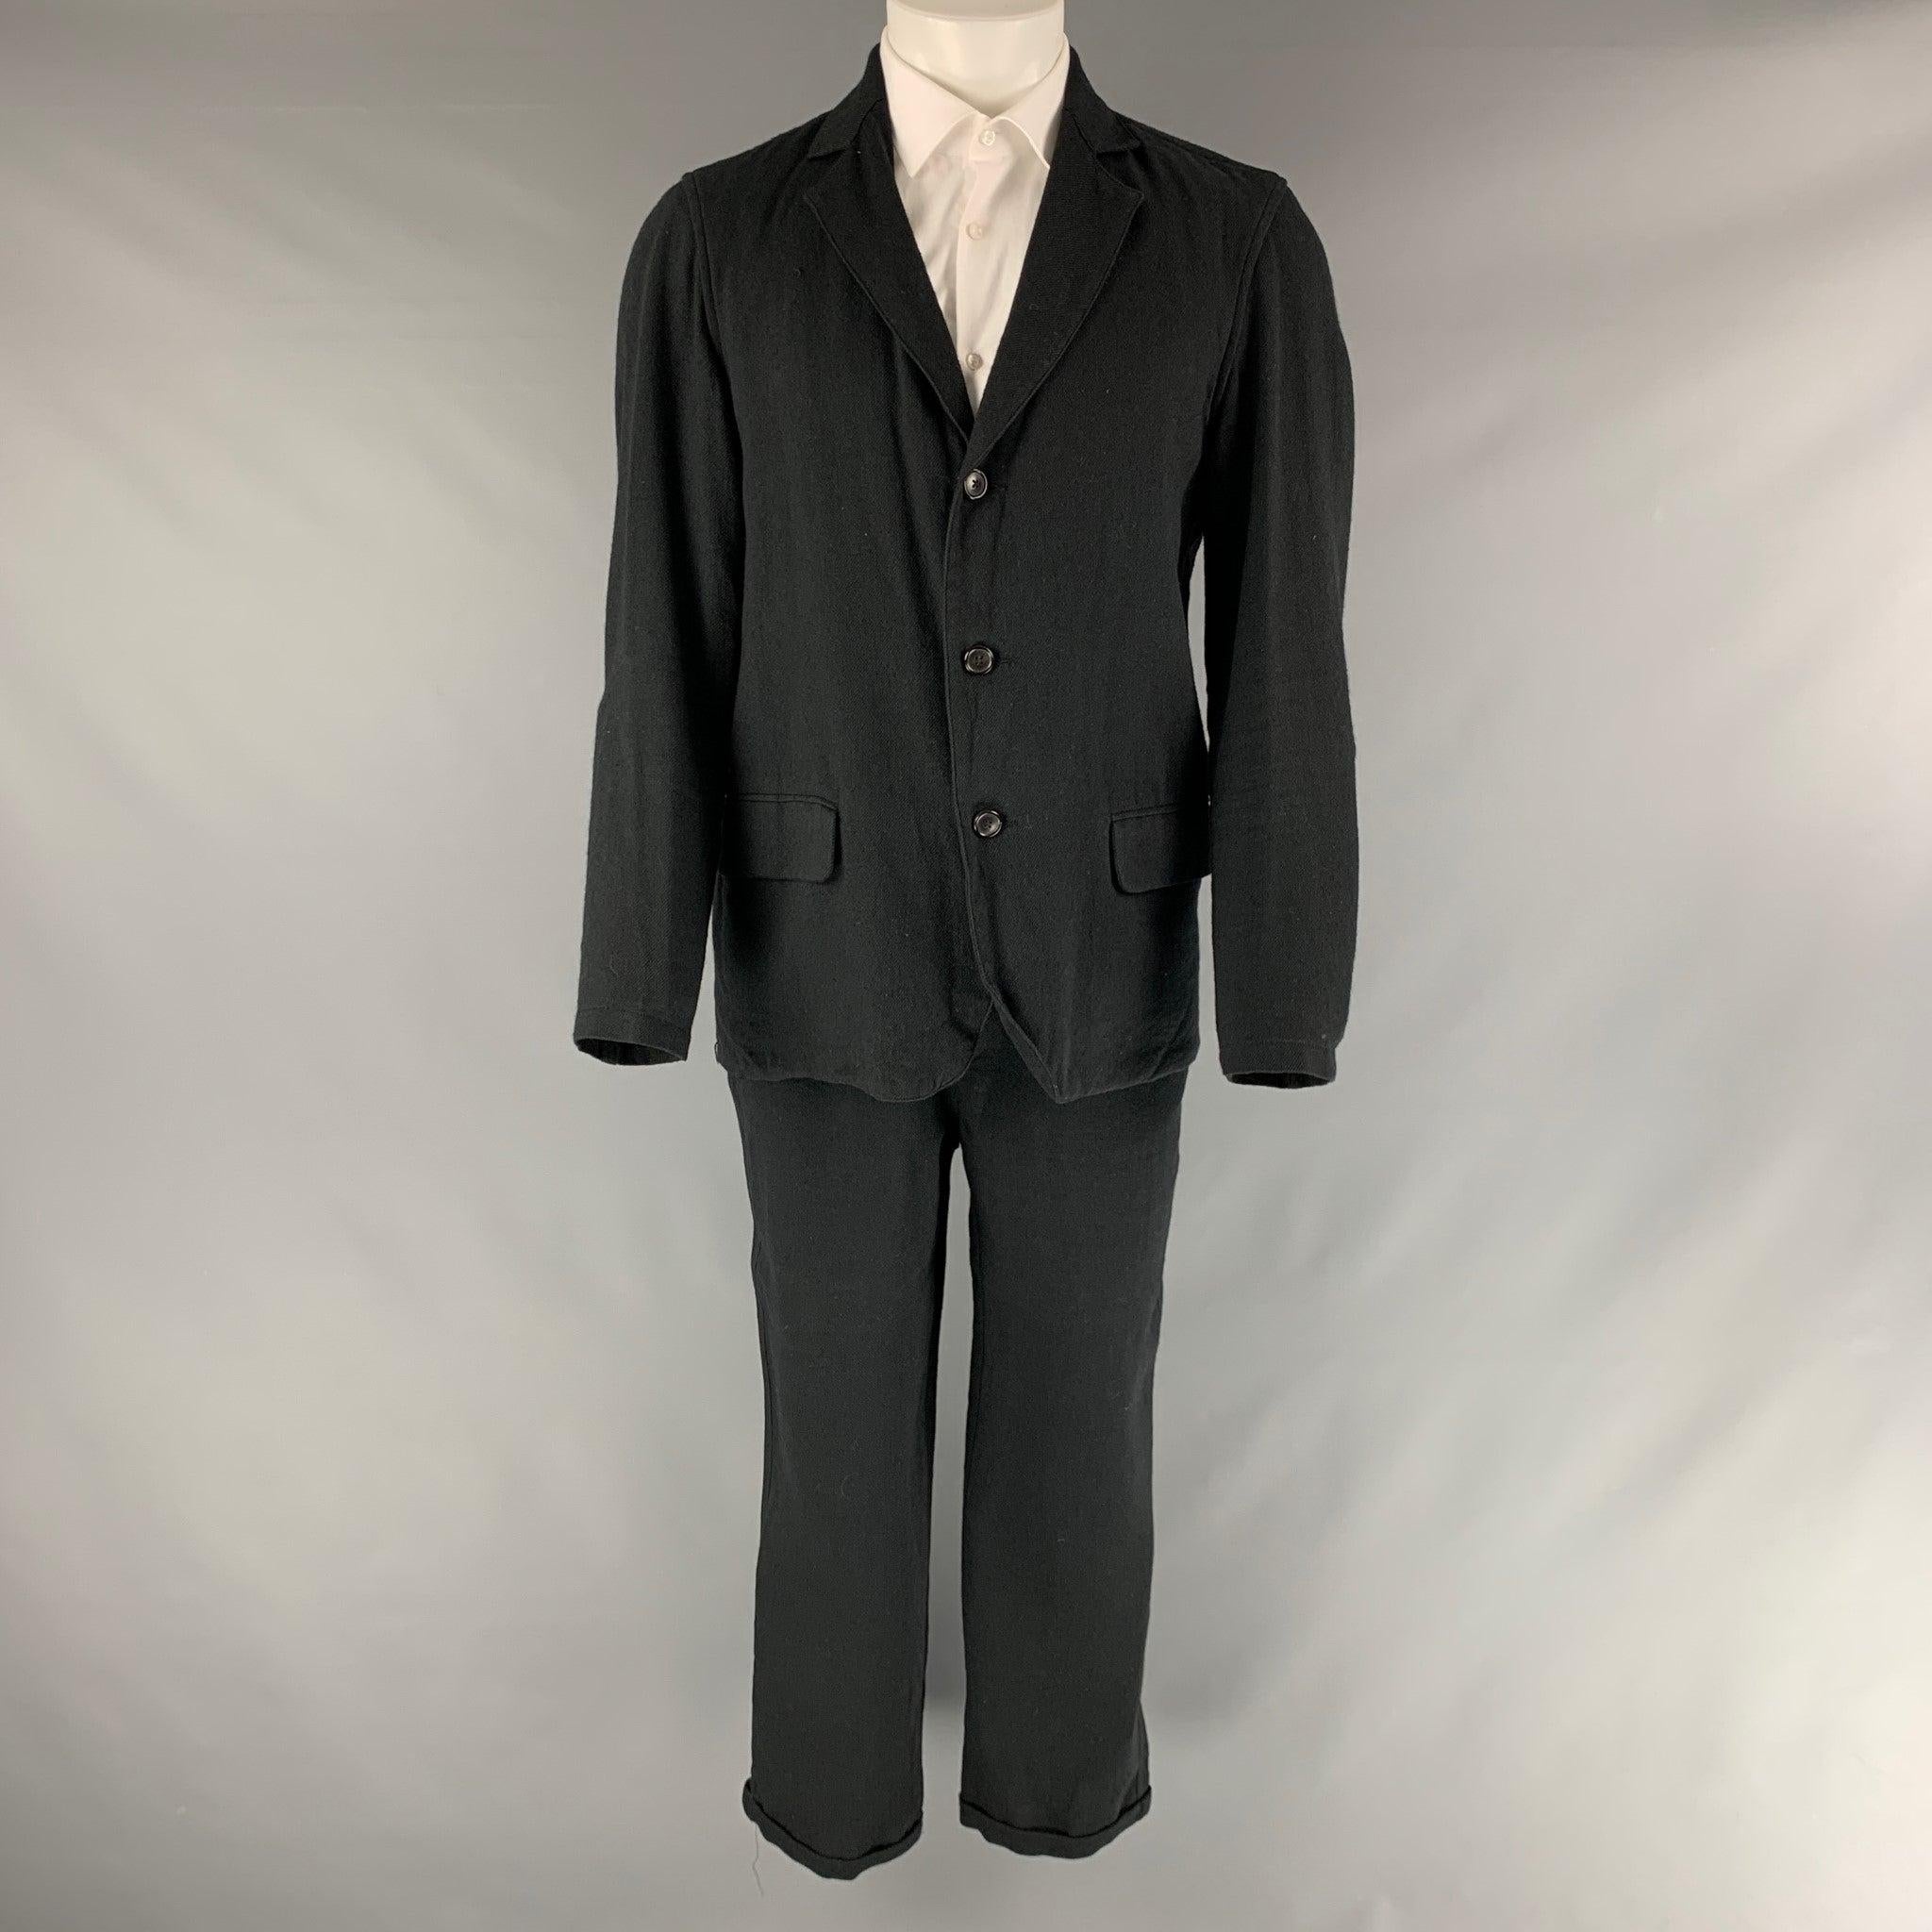 OUR LEGACY oversized suit comes in a black wool blend woven material and includes a single breasted, three button sport coat with a notch lapel and matching drawstring elastic waist trousers. Made in Japan.Excellent Pre-Owned Condition. 

Marked:  